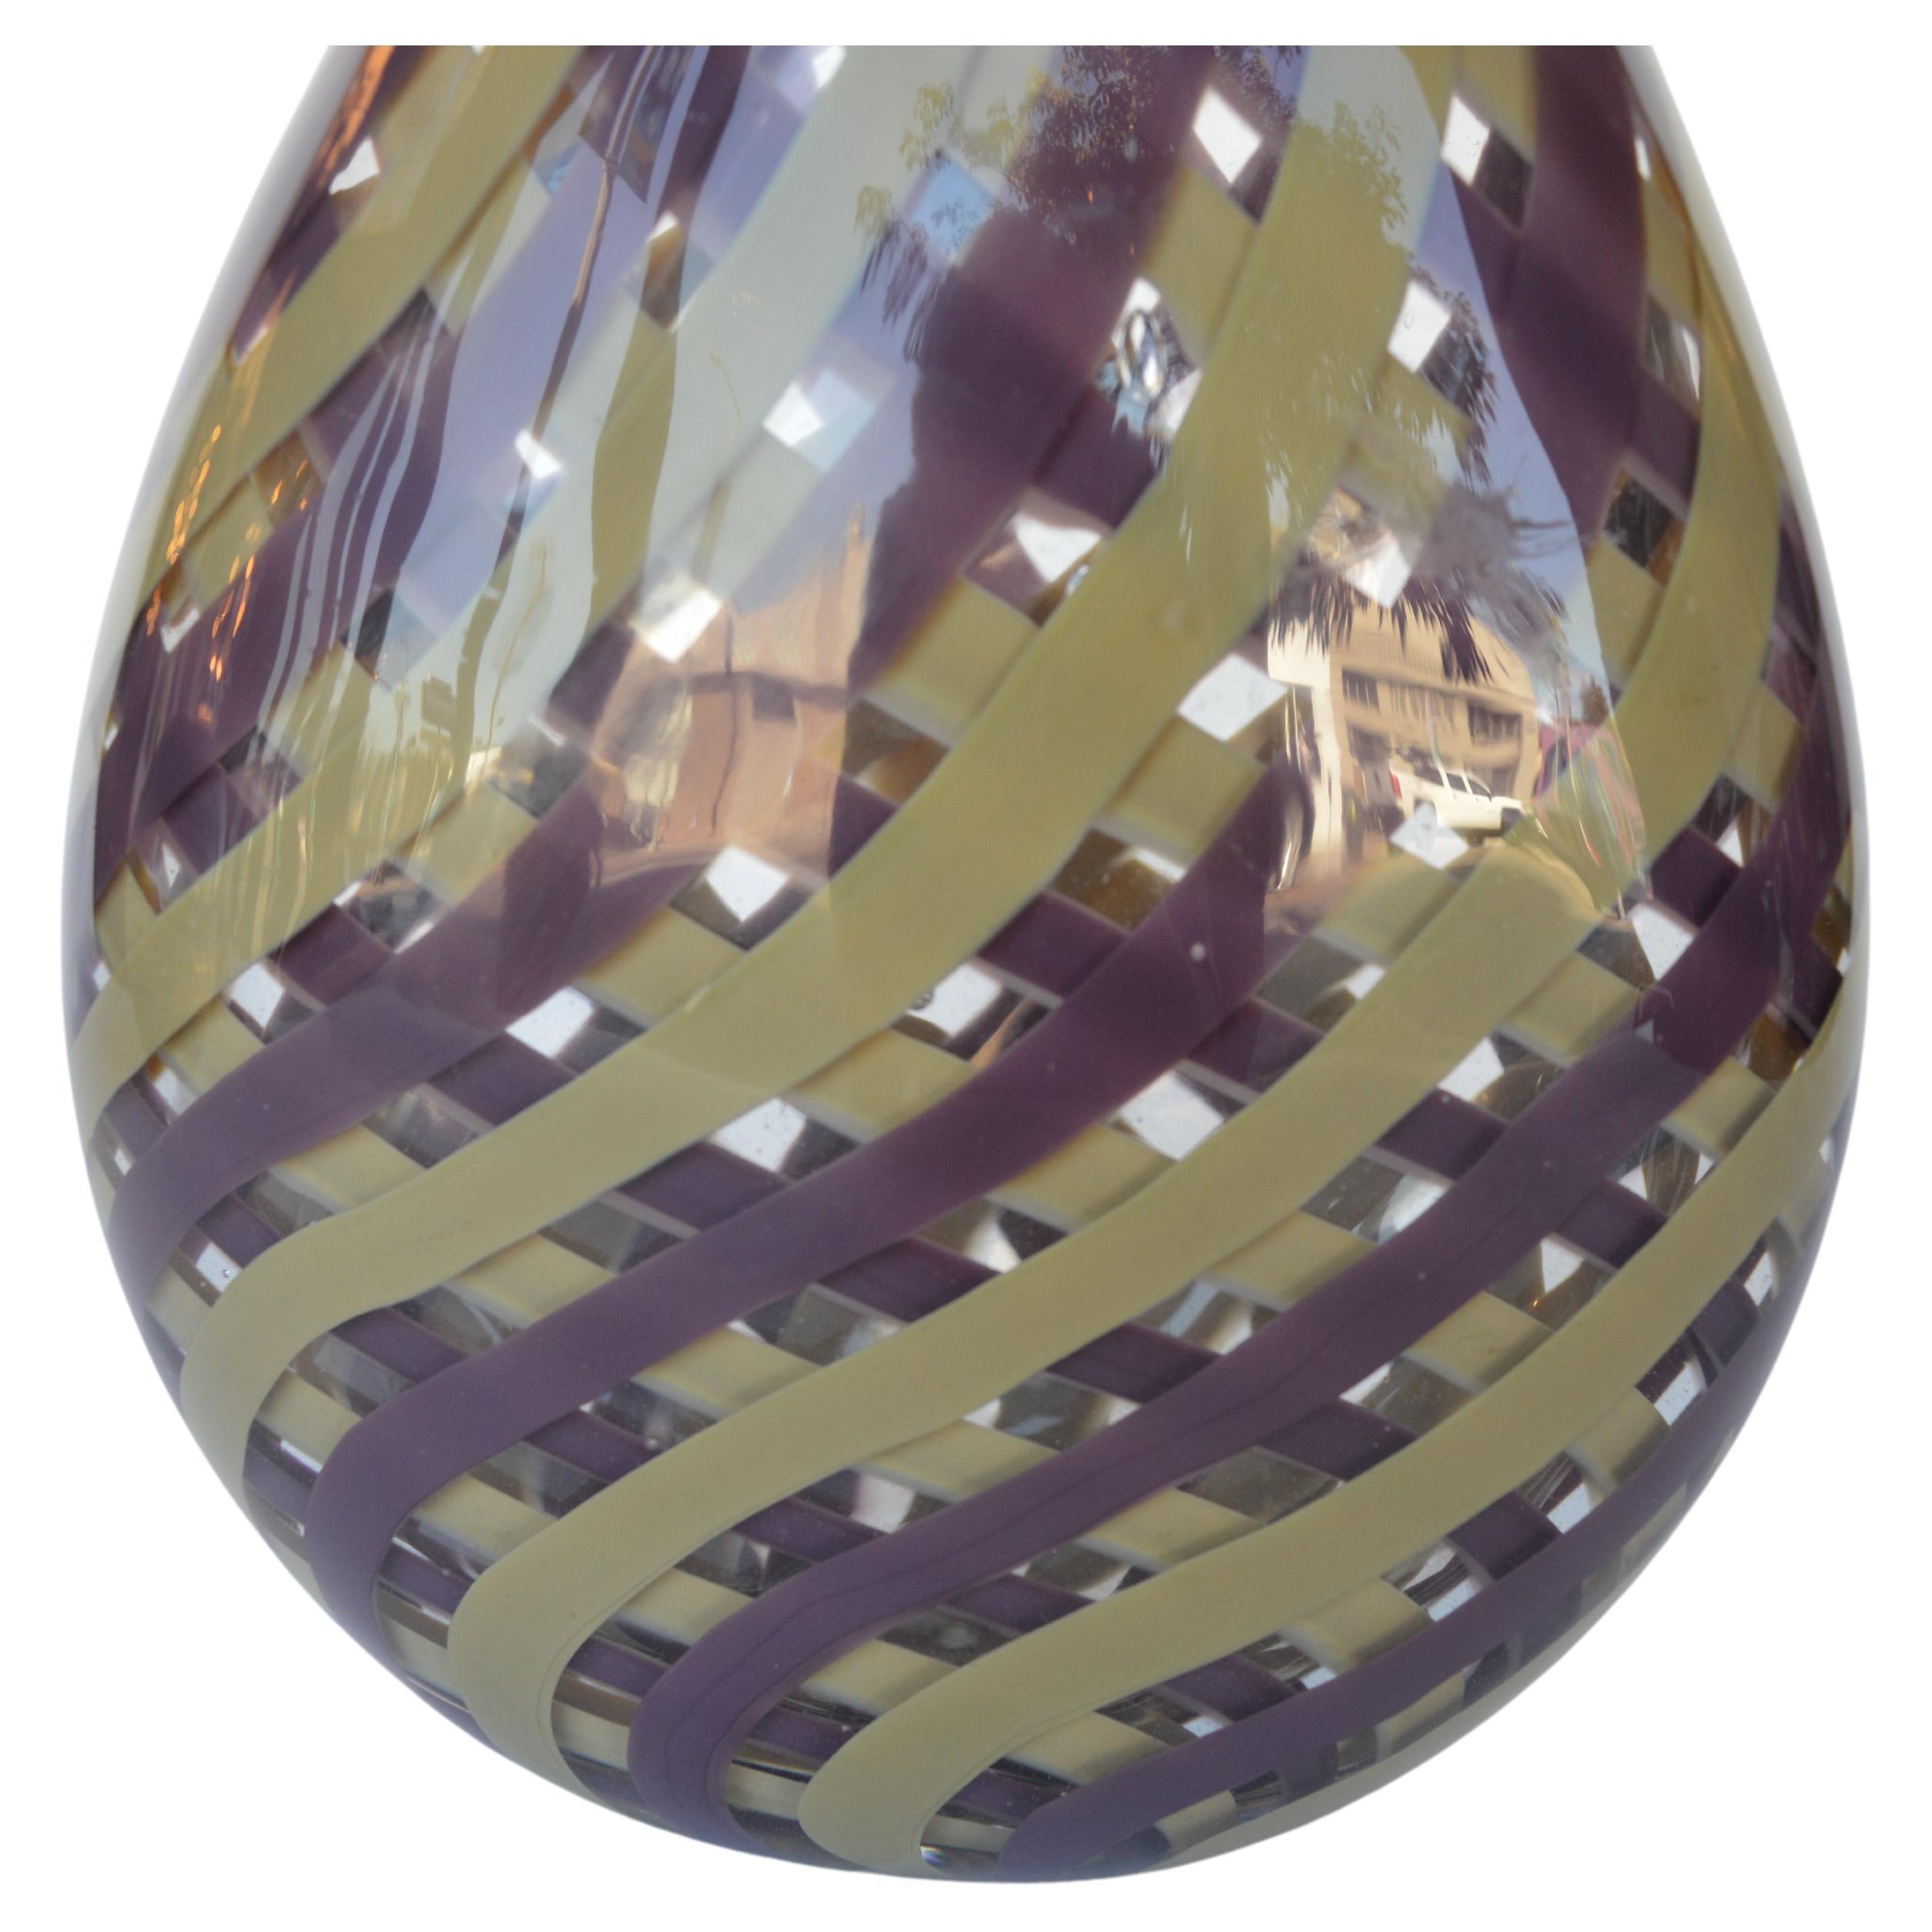 Italian Murano Glass vase hand blown with Purple and Mustard Stripes Interlacing one other. Made in Italy, c. 1970s. Murano Mark Engraved on the Base.